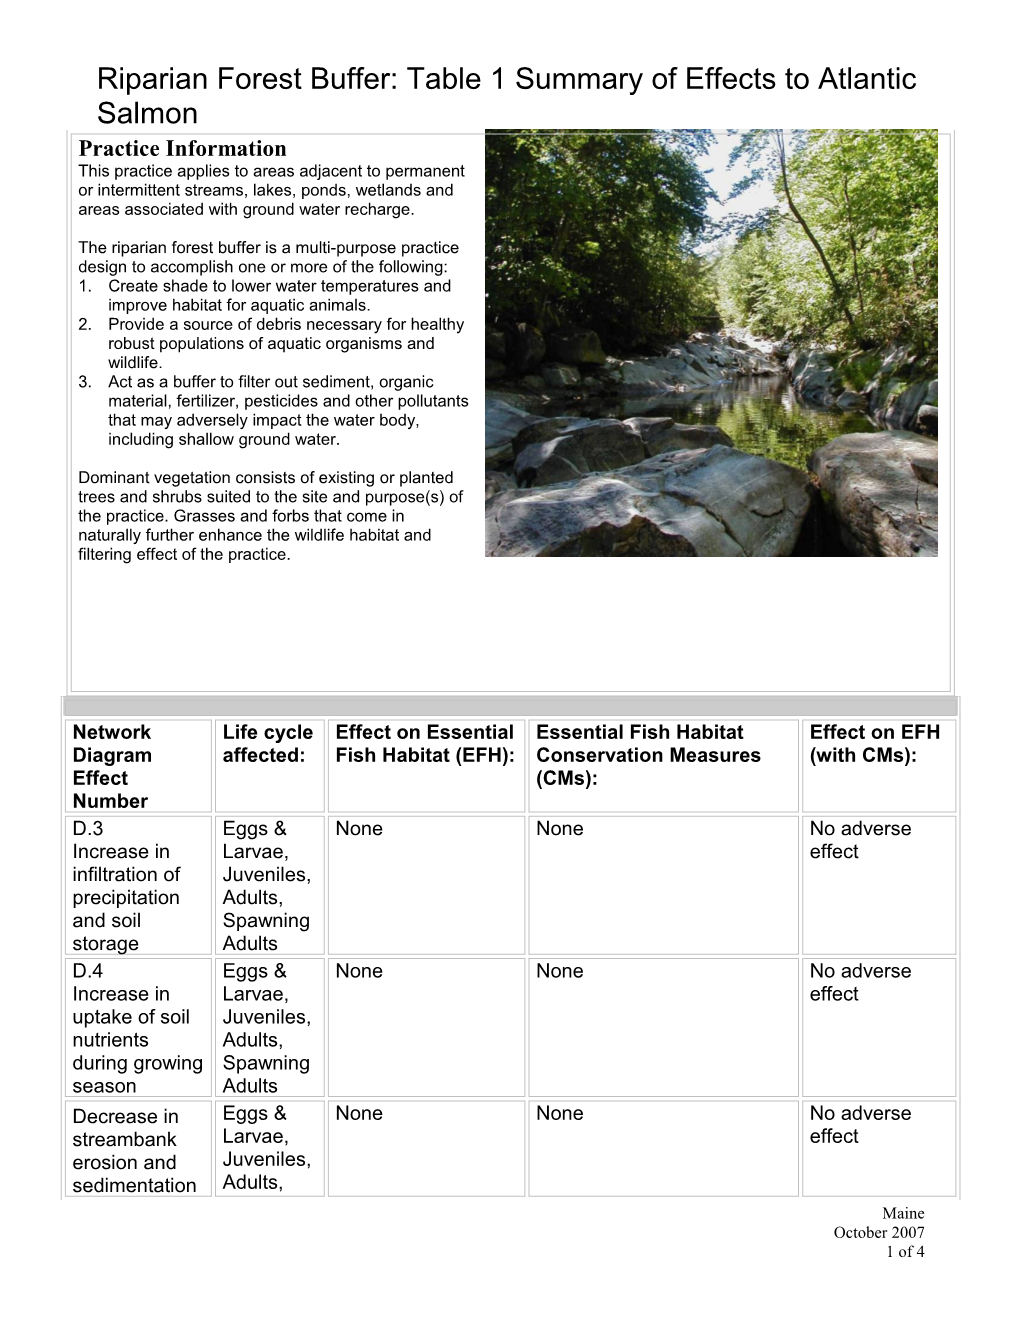 Riparian Forest Buffer:Table 1 Summary of Effects to Atlantic Salmon